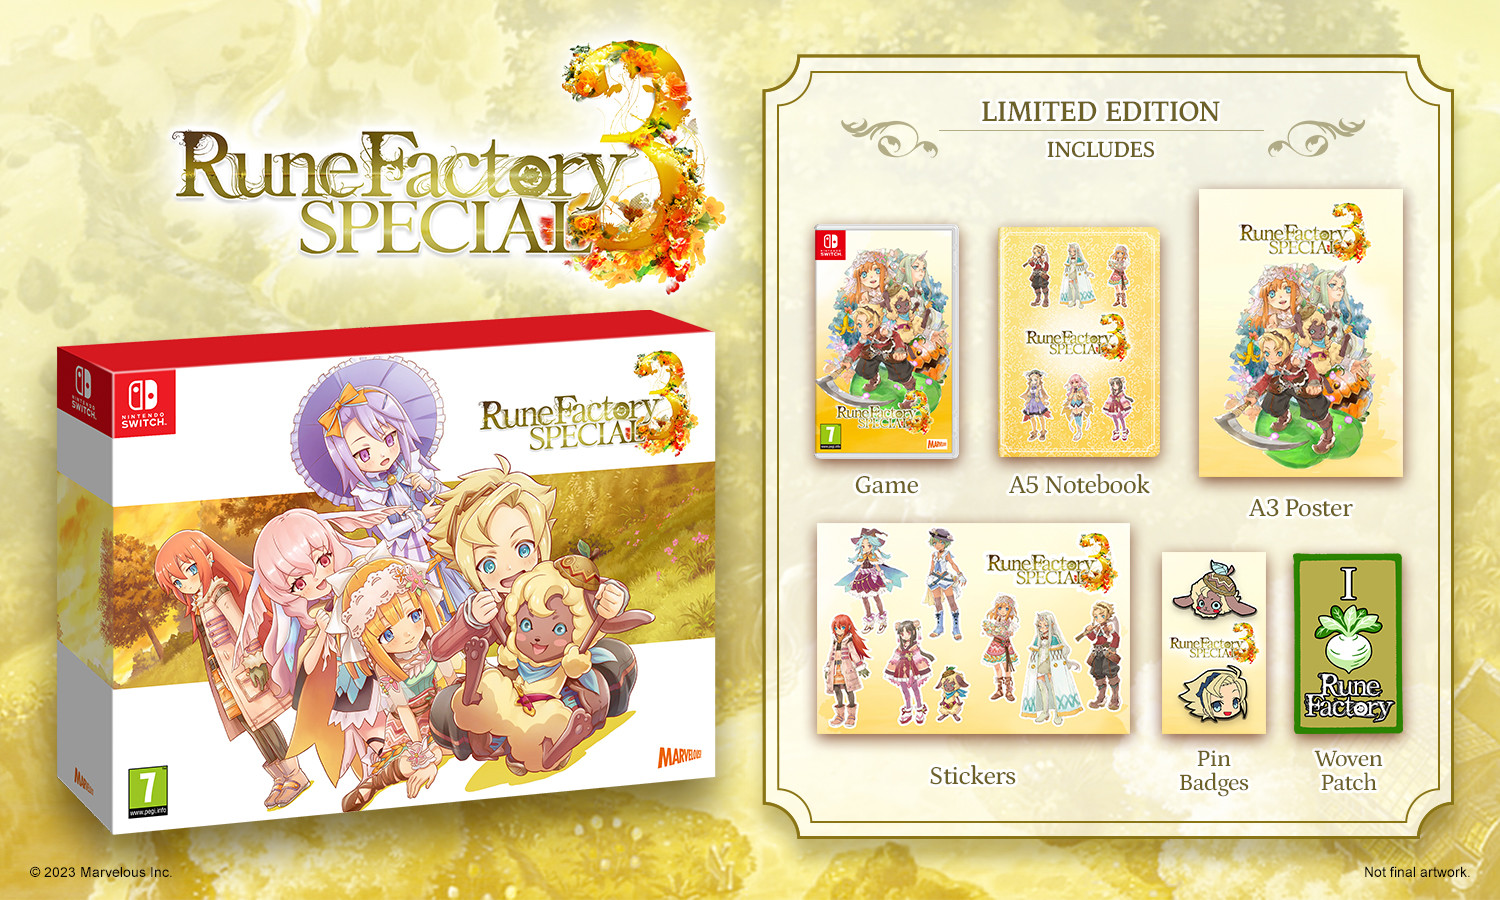 Rune Factory 3 Special Limited Edition - Nintendo Switch